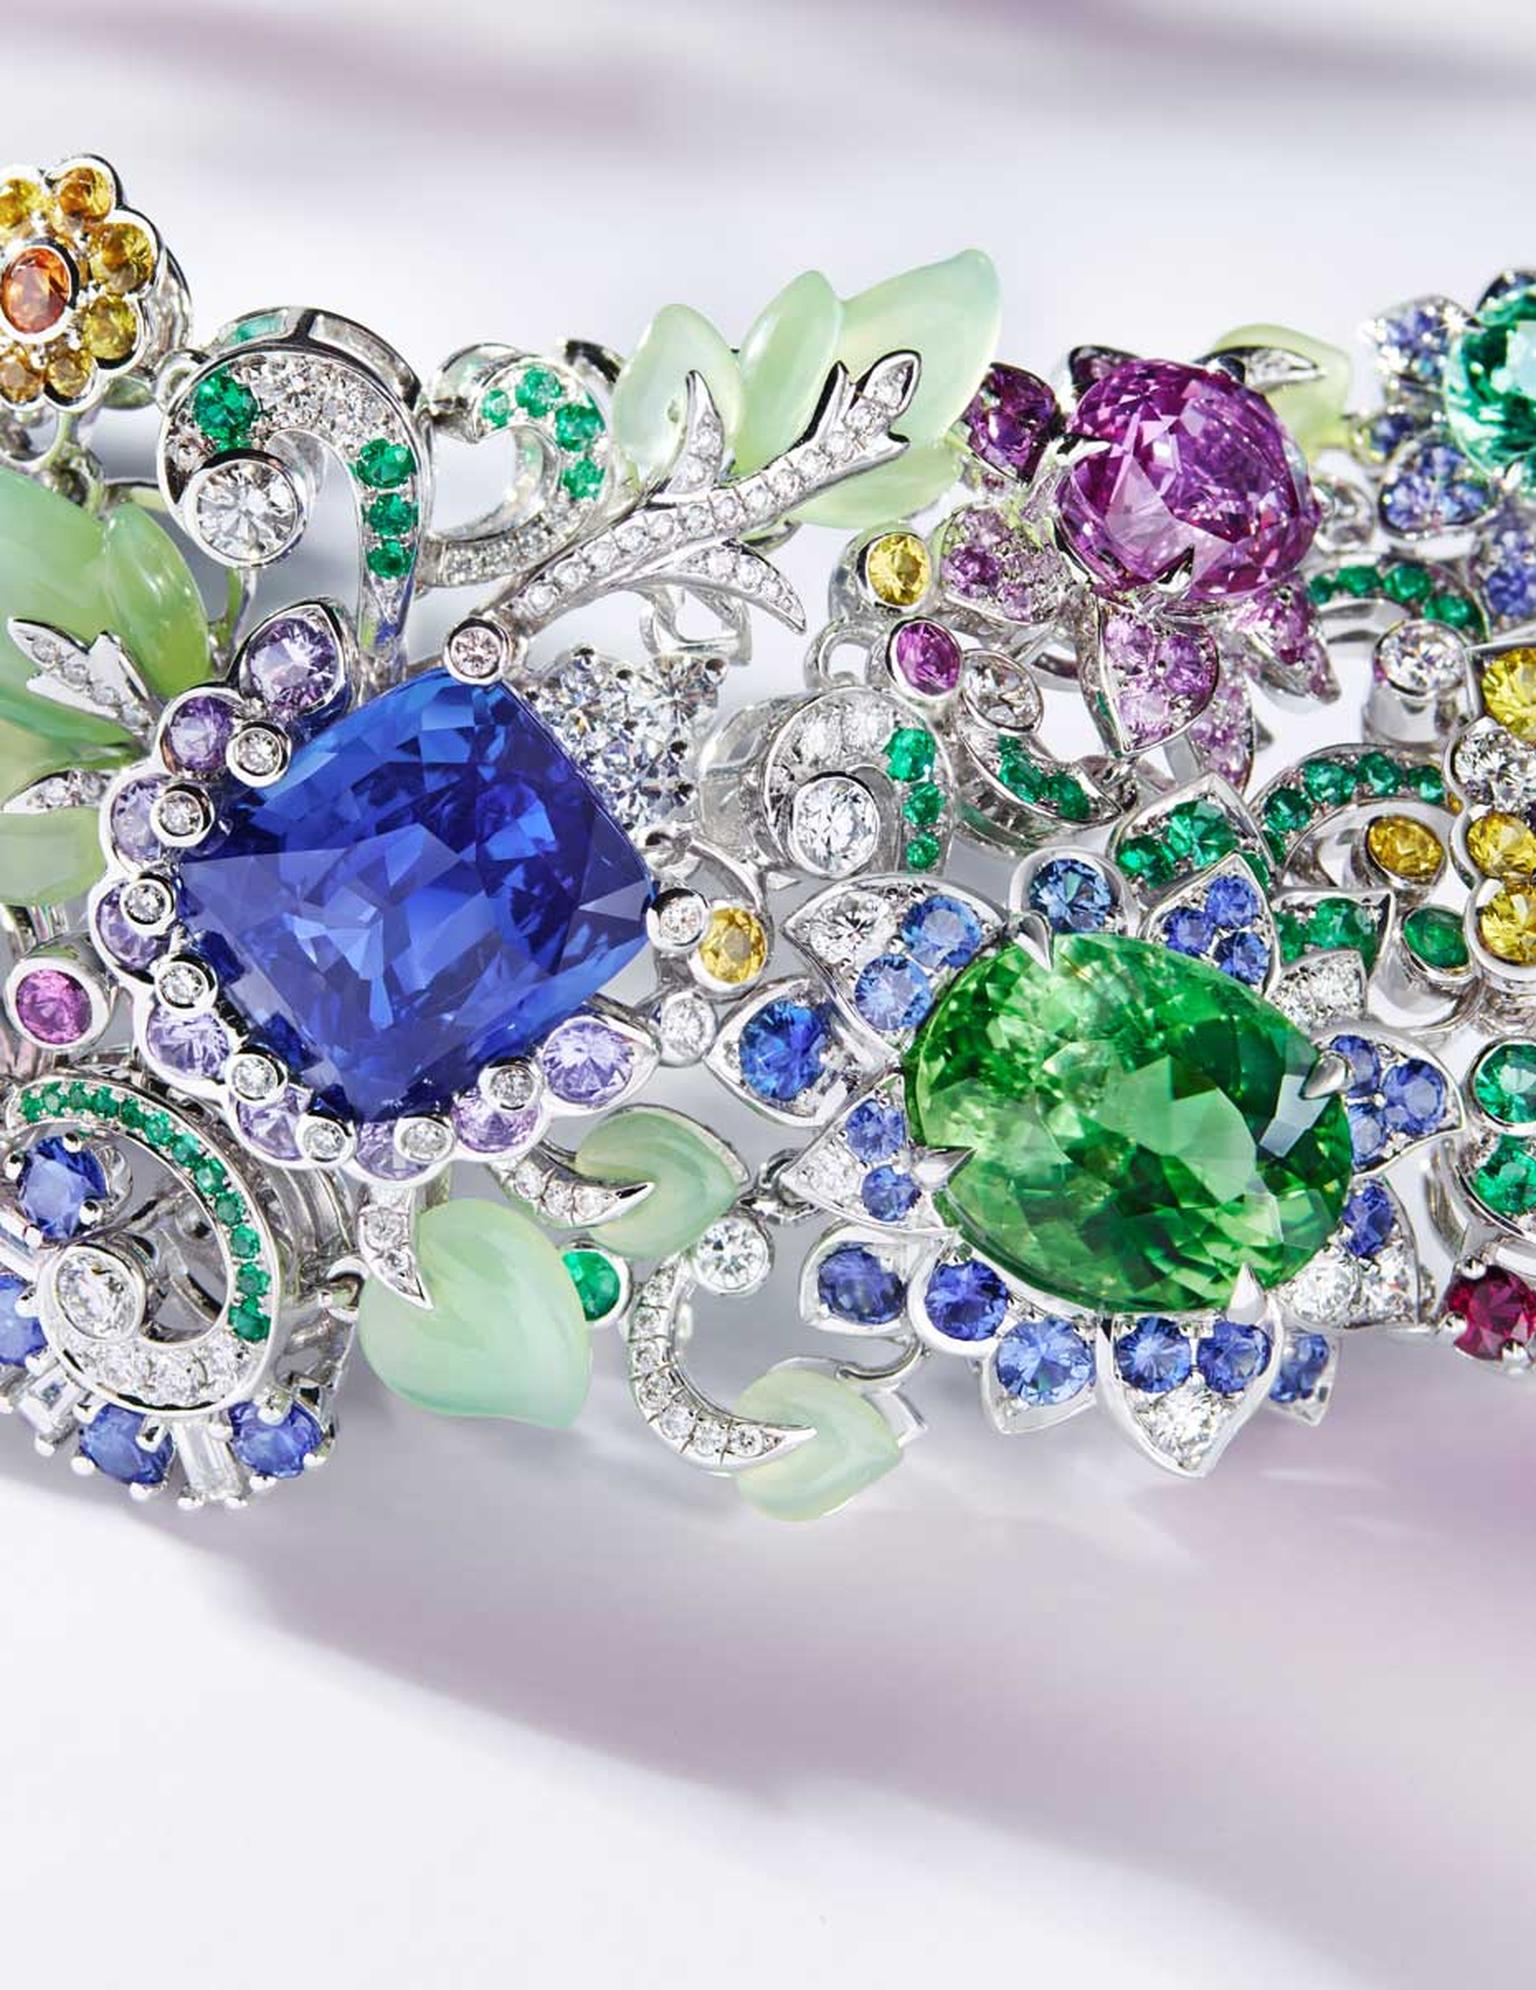 A close-up of the luminous coloured gemstones featured in this Fabergé bracelet from the Secret Garden high jewellery collection.